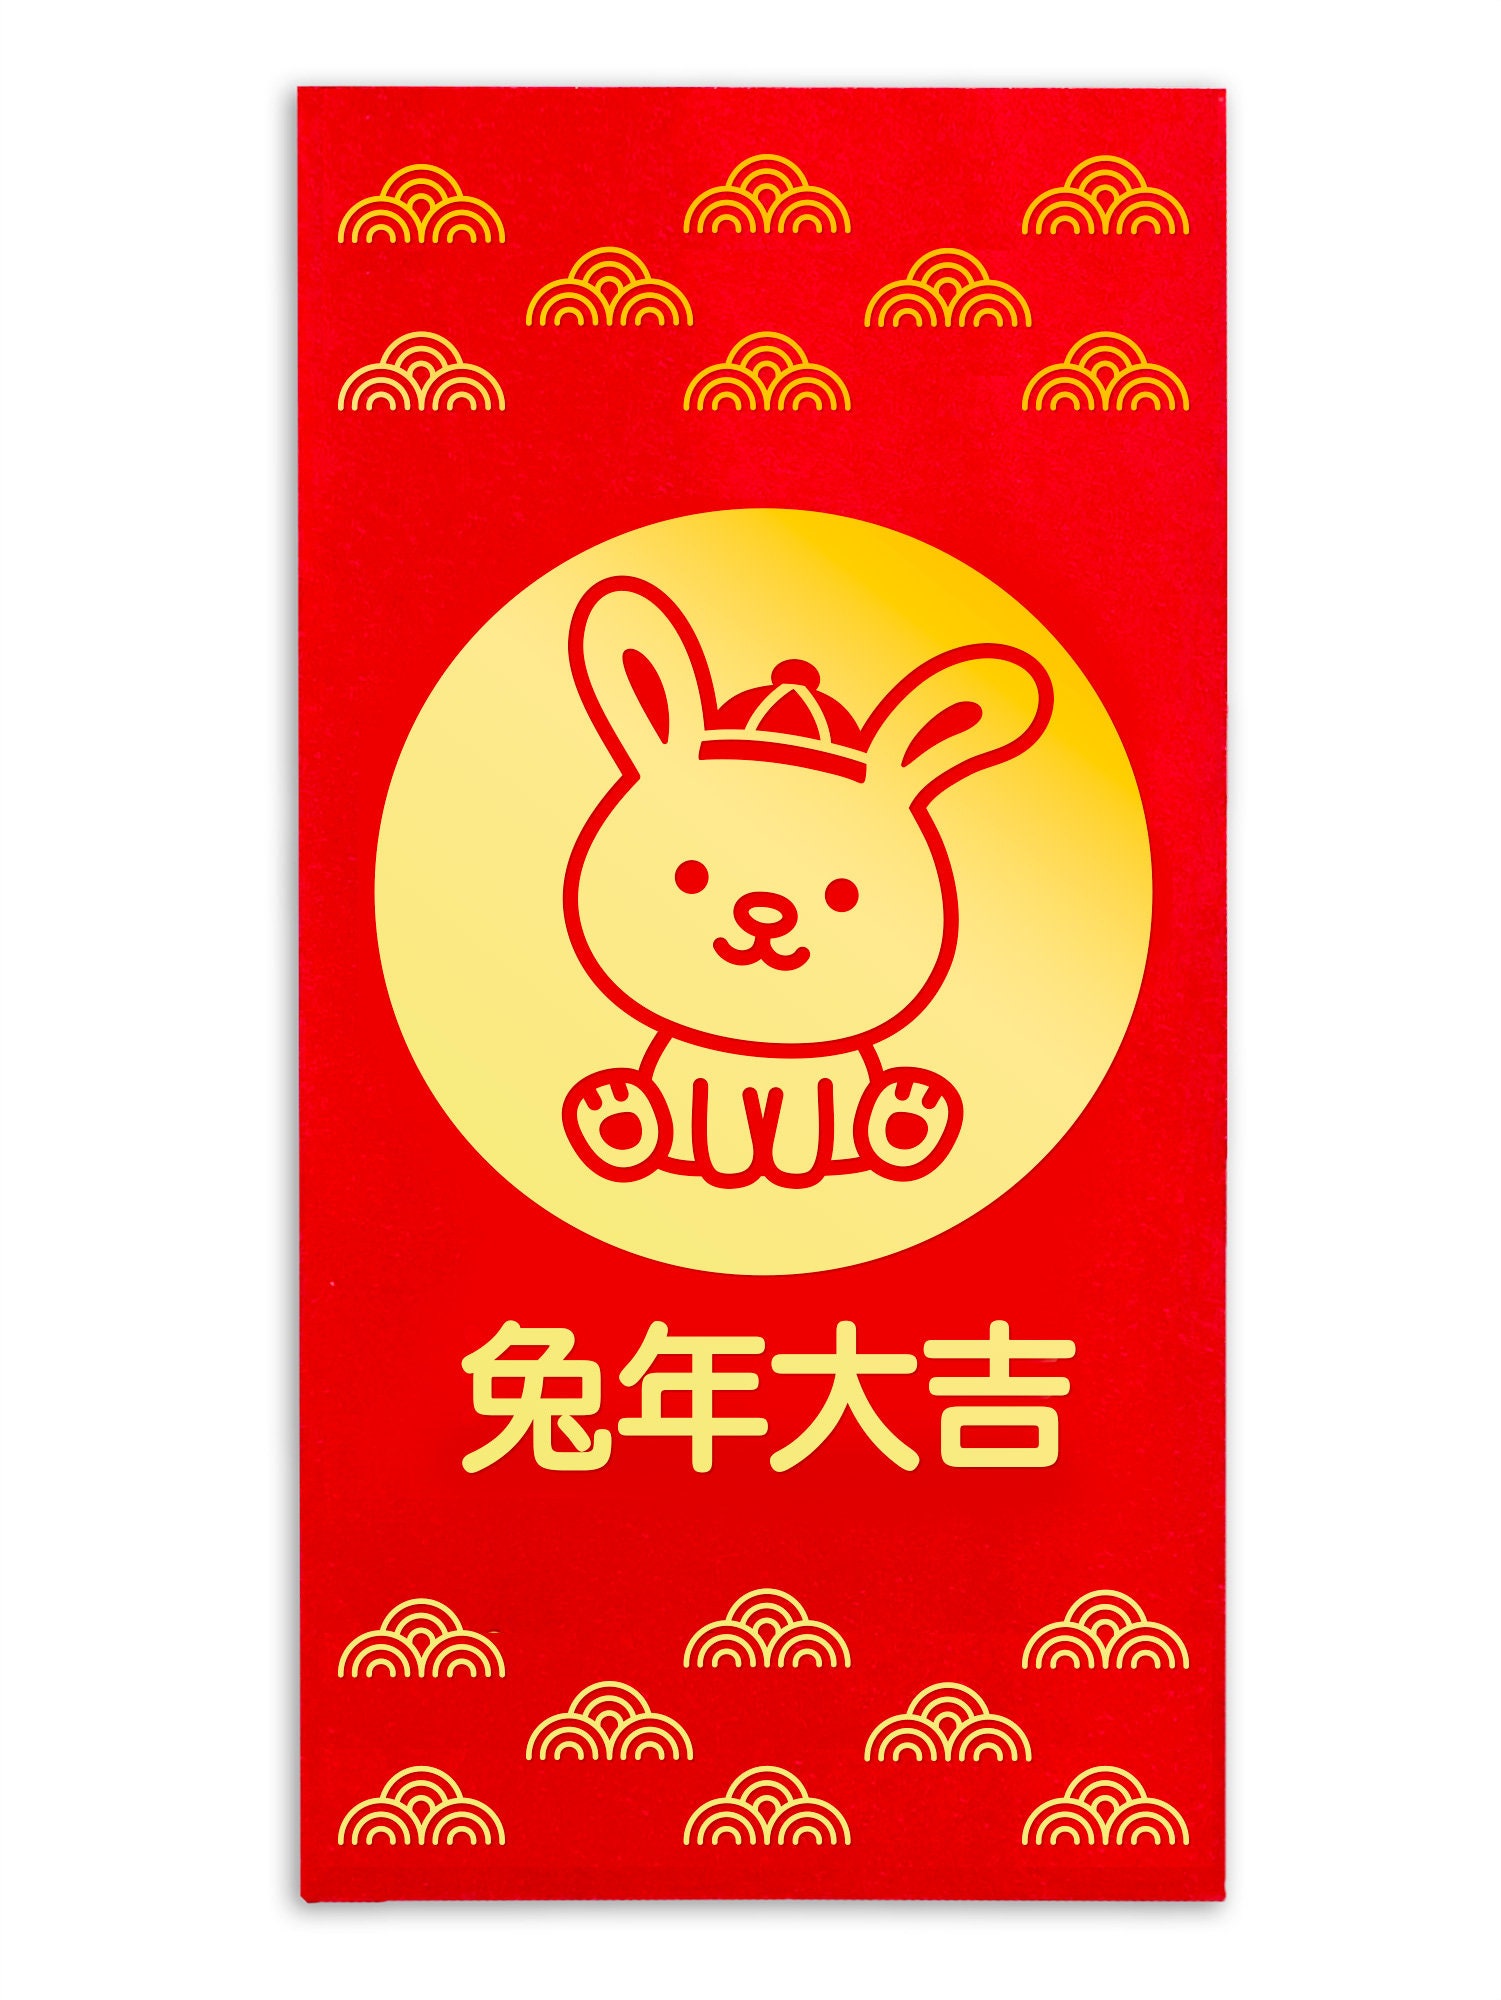 red envelope year of the rabbit